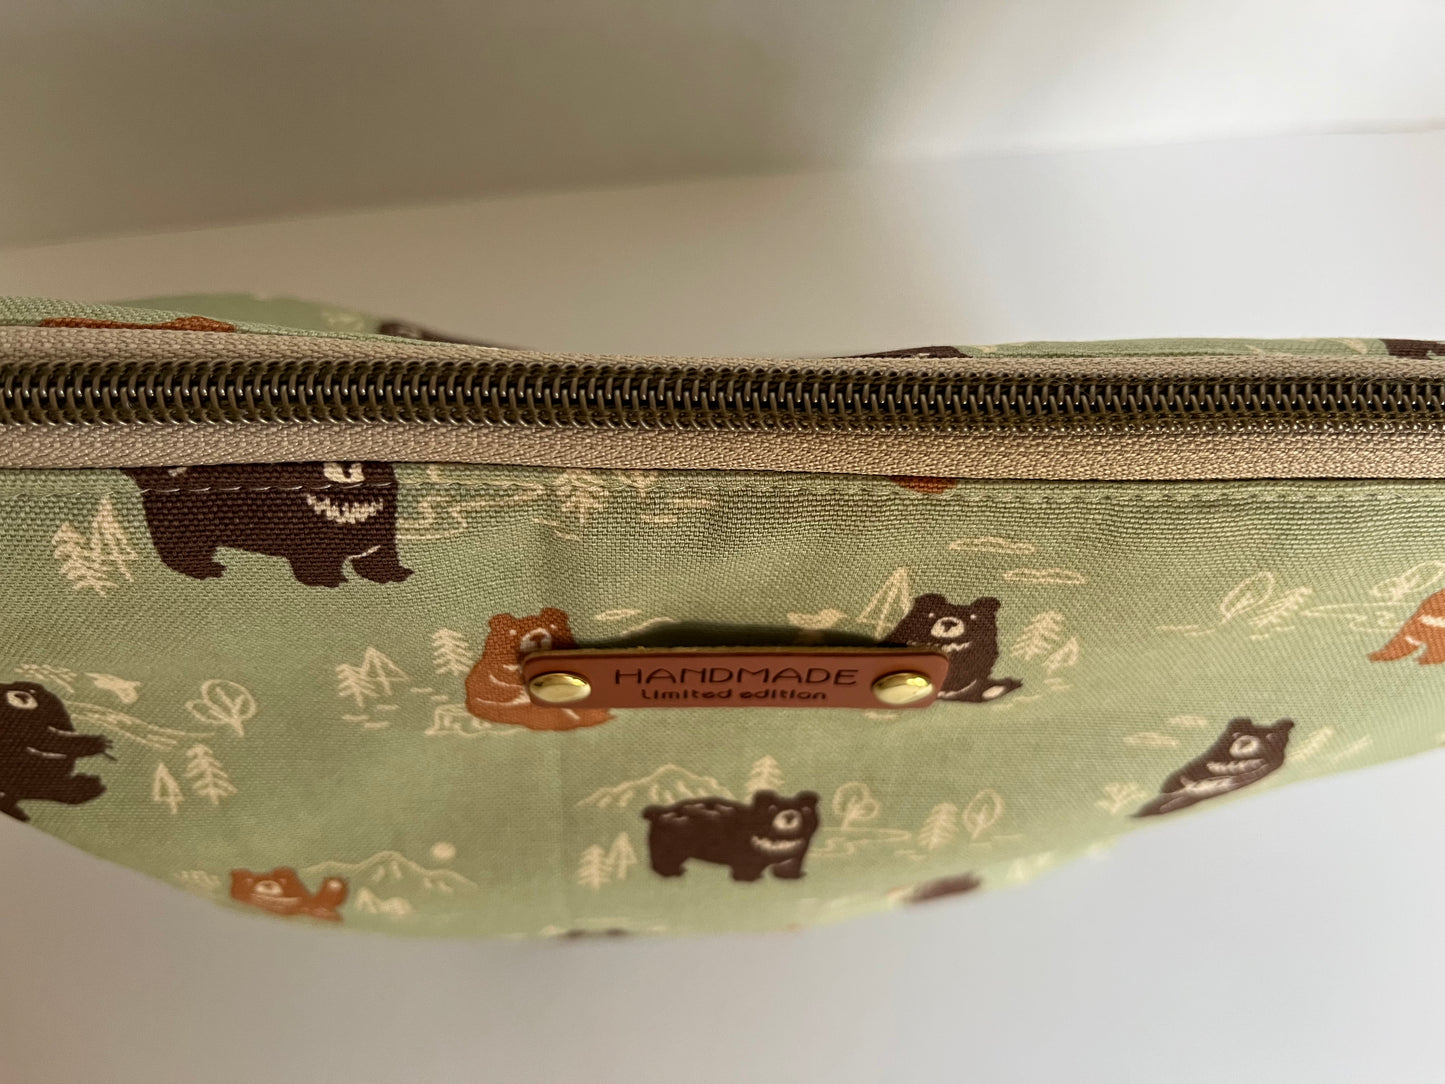 Bears in Mountains Large Cosmetics Bag,Toiletry Bag